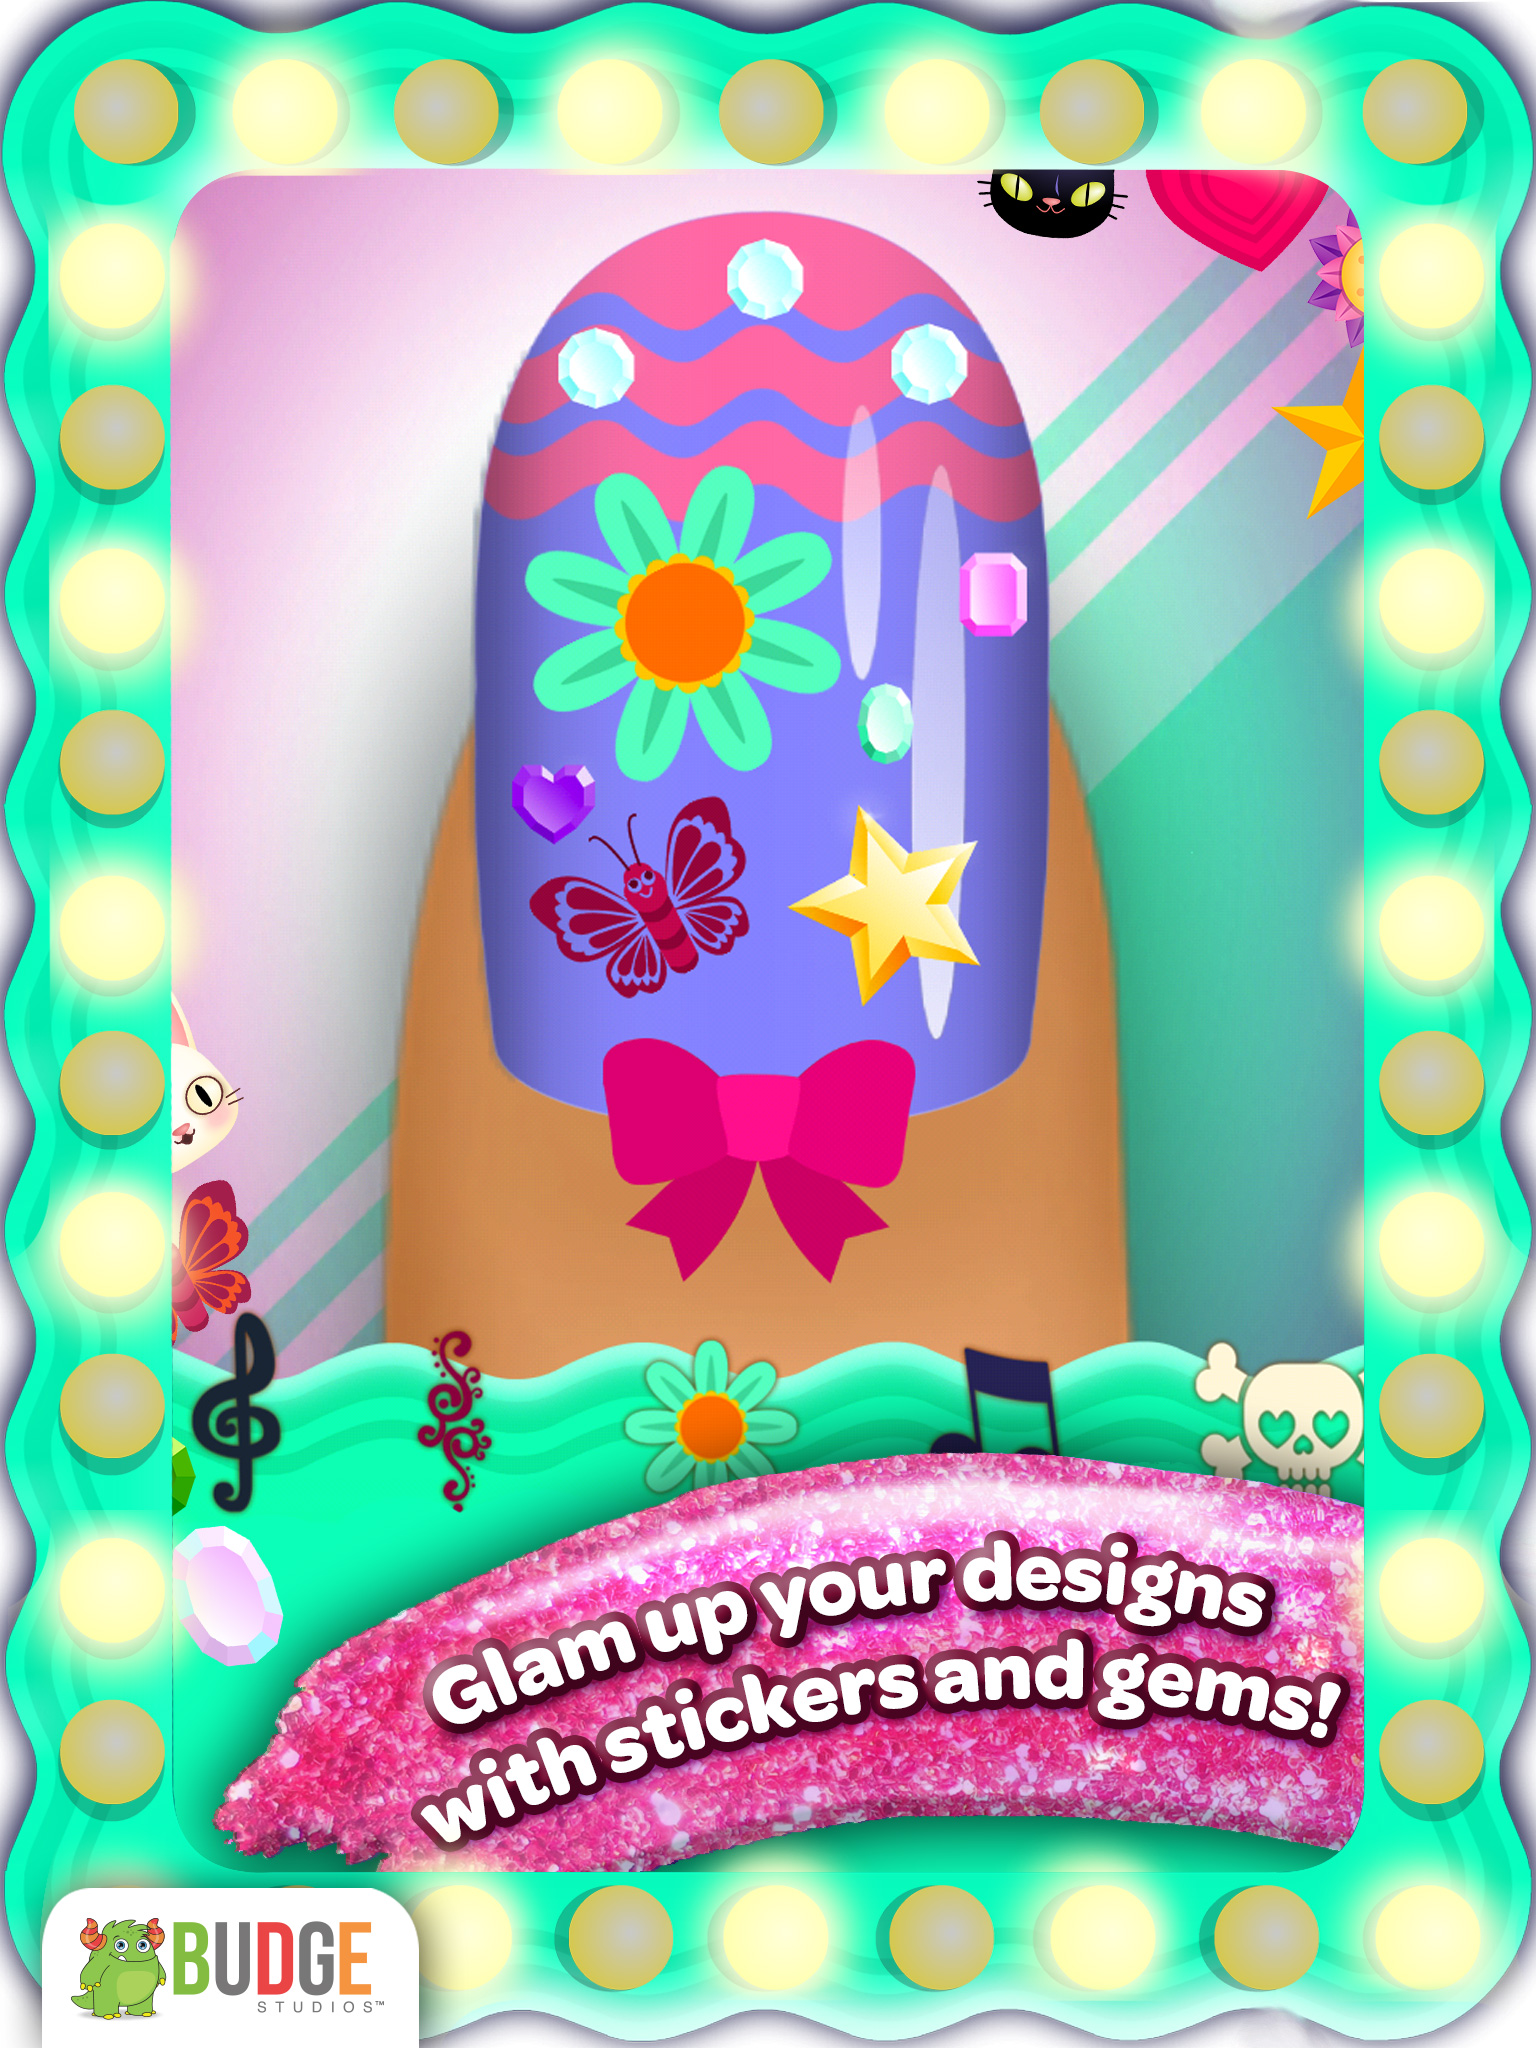 Glam up your designs with stickers and gems!